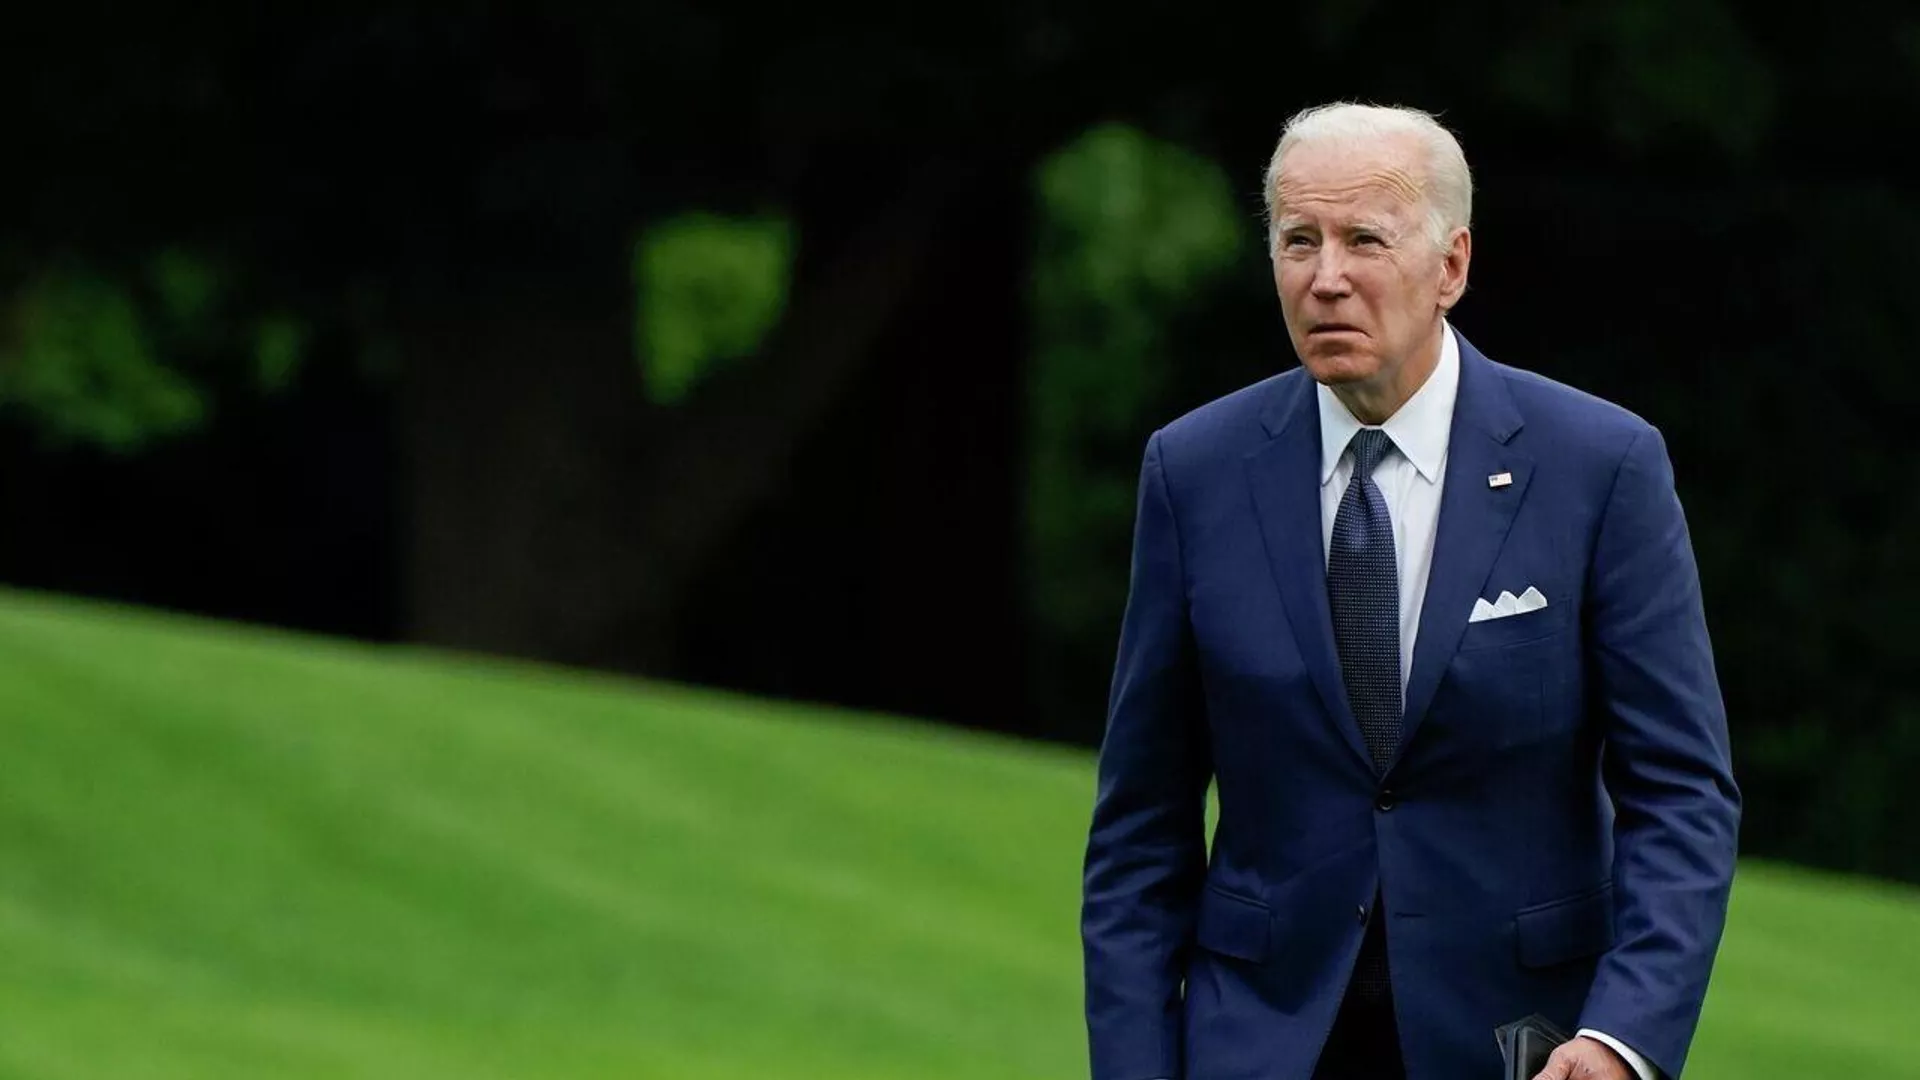 U.S. Rep. Green: Biden is dragging all Americans into a proxy war with Russia